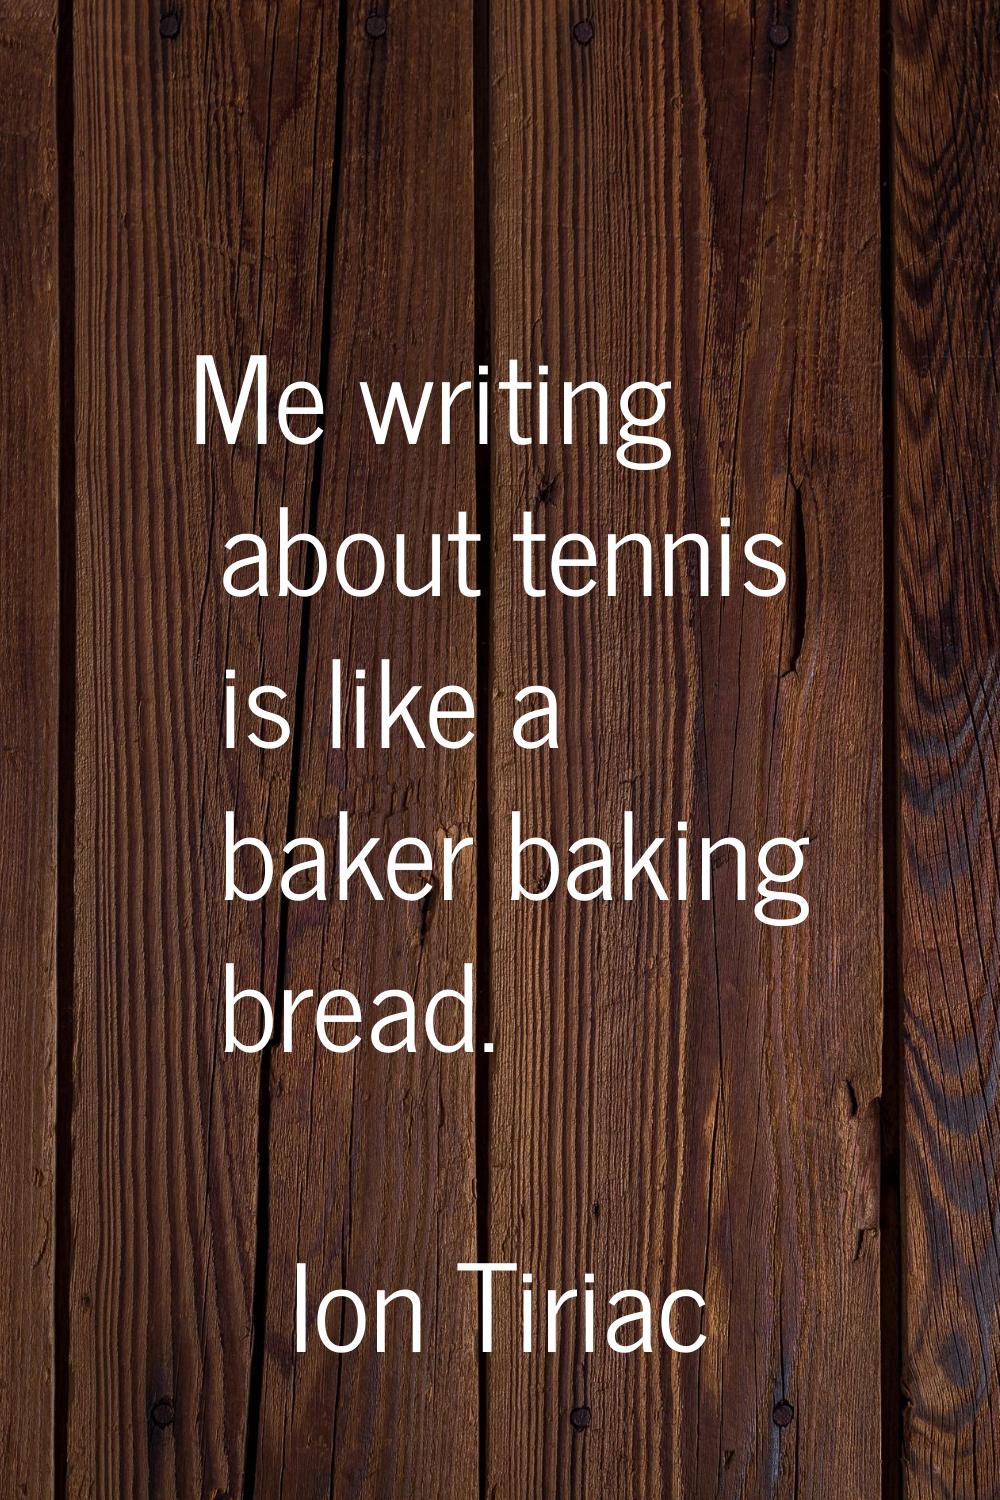 Me writing about tennis is like a baker baking bread.